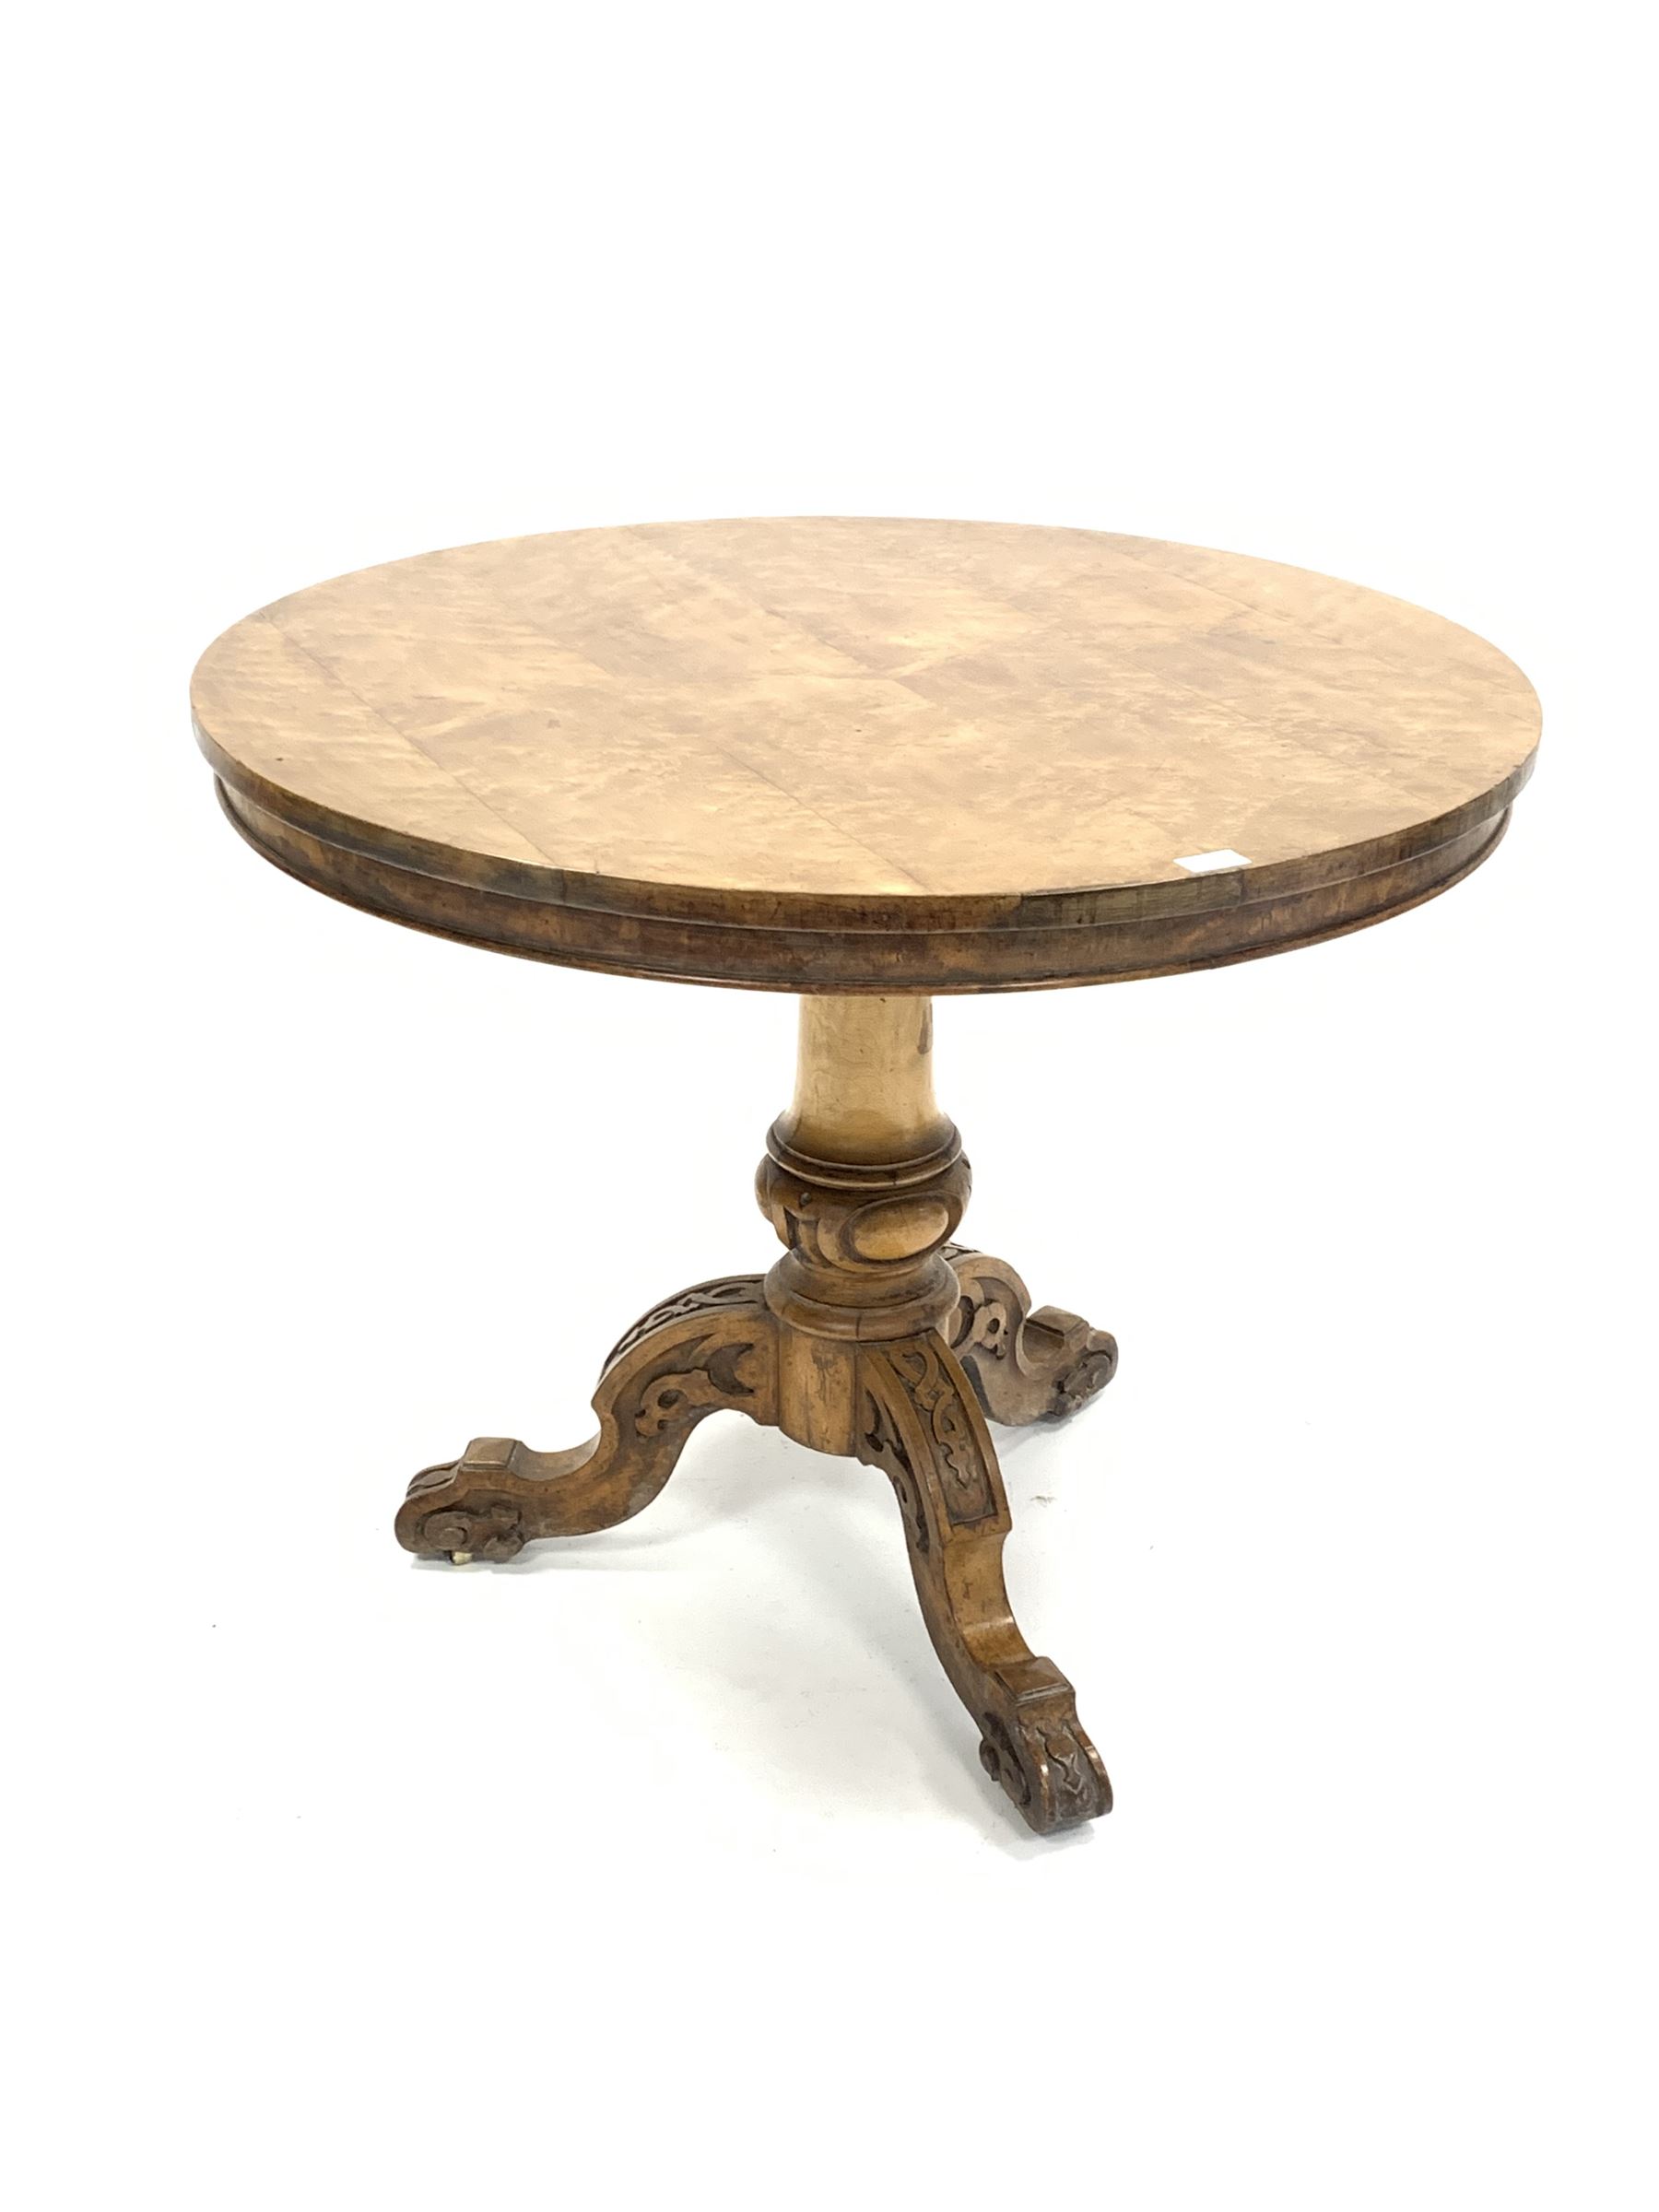 Victorian maple tilt top table by 'Chindley & Sons'